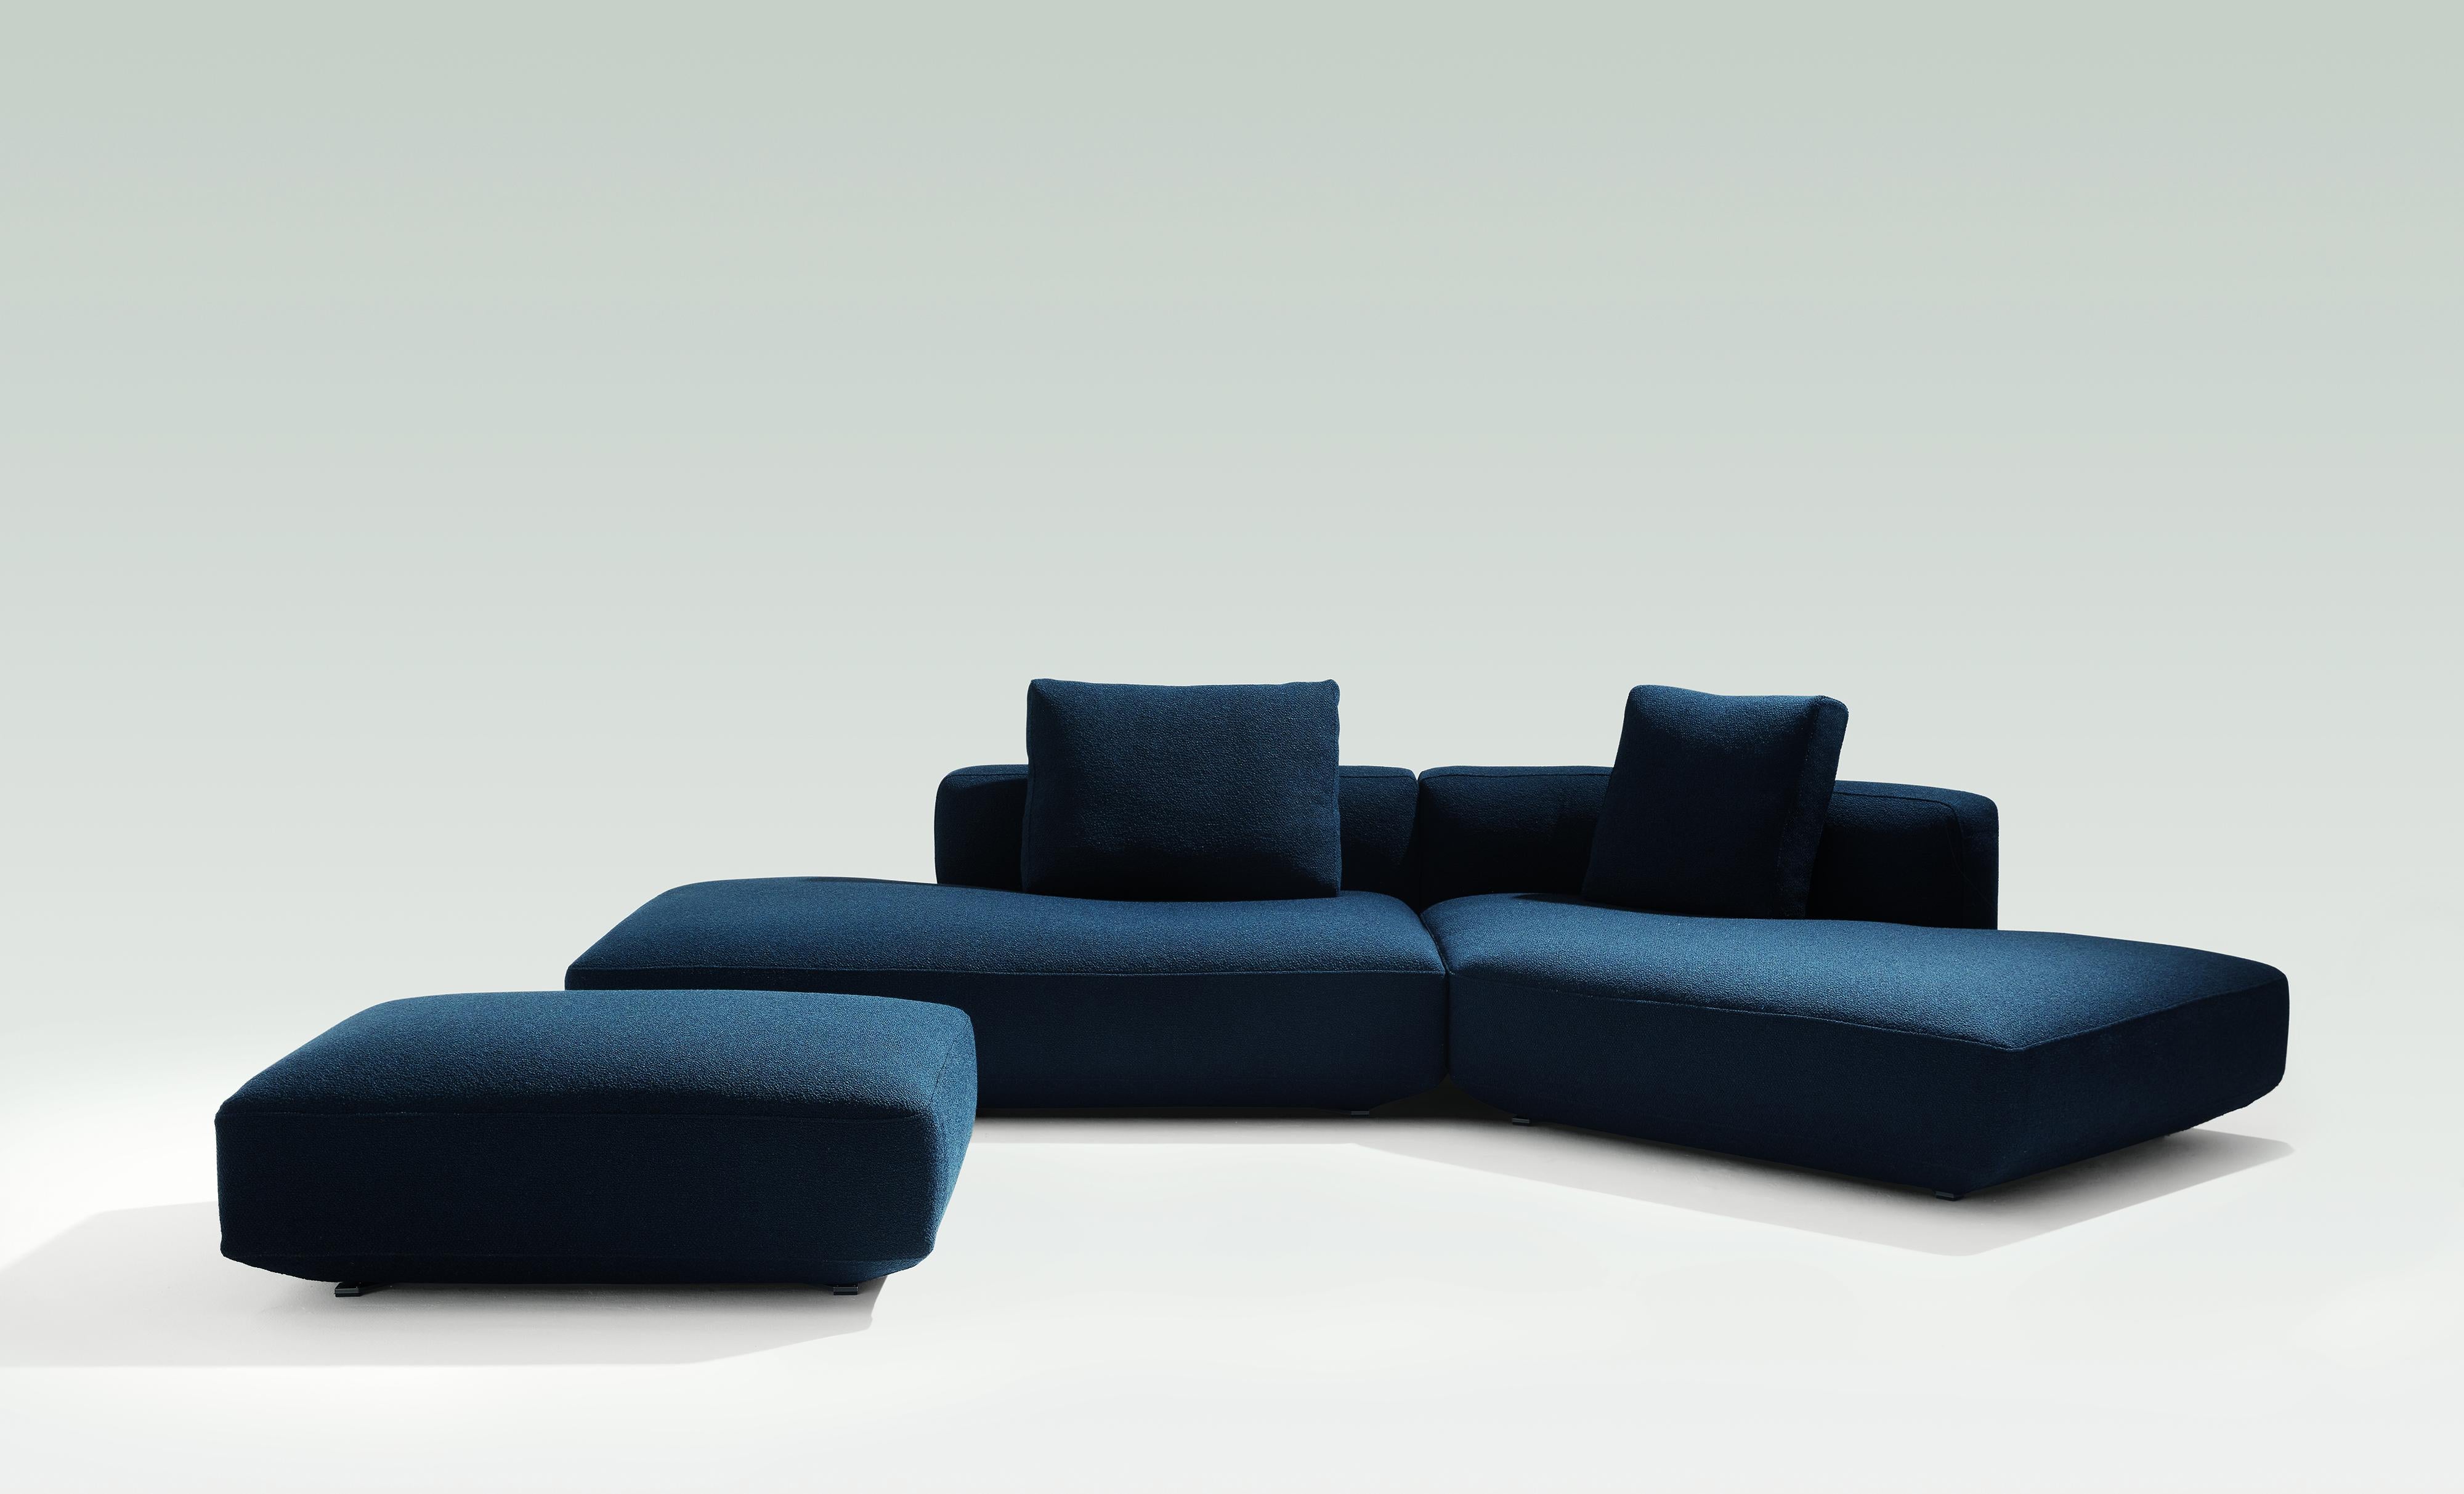 Zanotta Pianoalto Modular Sofa in Blue Fabric by Ludovica & Roberto Palomba

The range of modular or monobloc sofas allows many corner or straight compositions. 

Back cushions upholstered in polyurethane/ Dacron Du Pont or in 100% pure goose